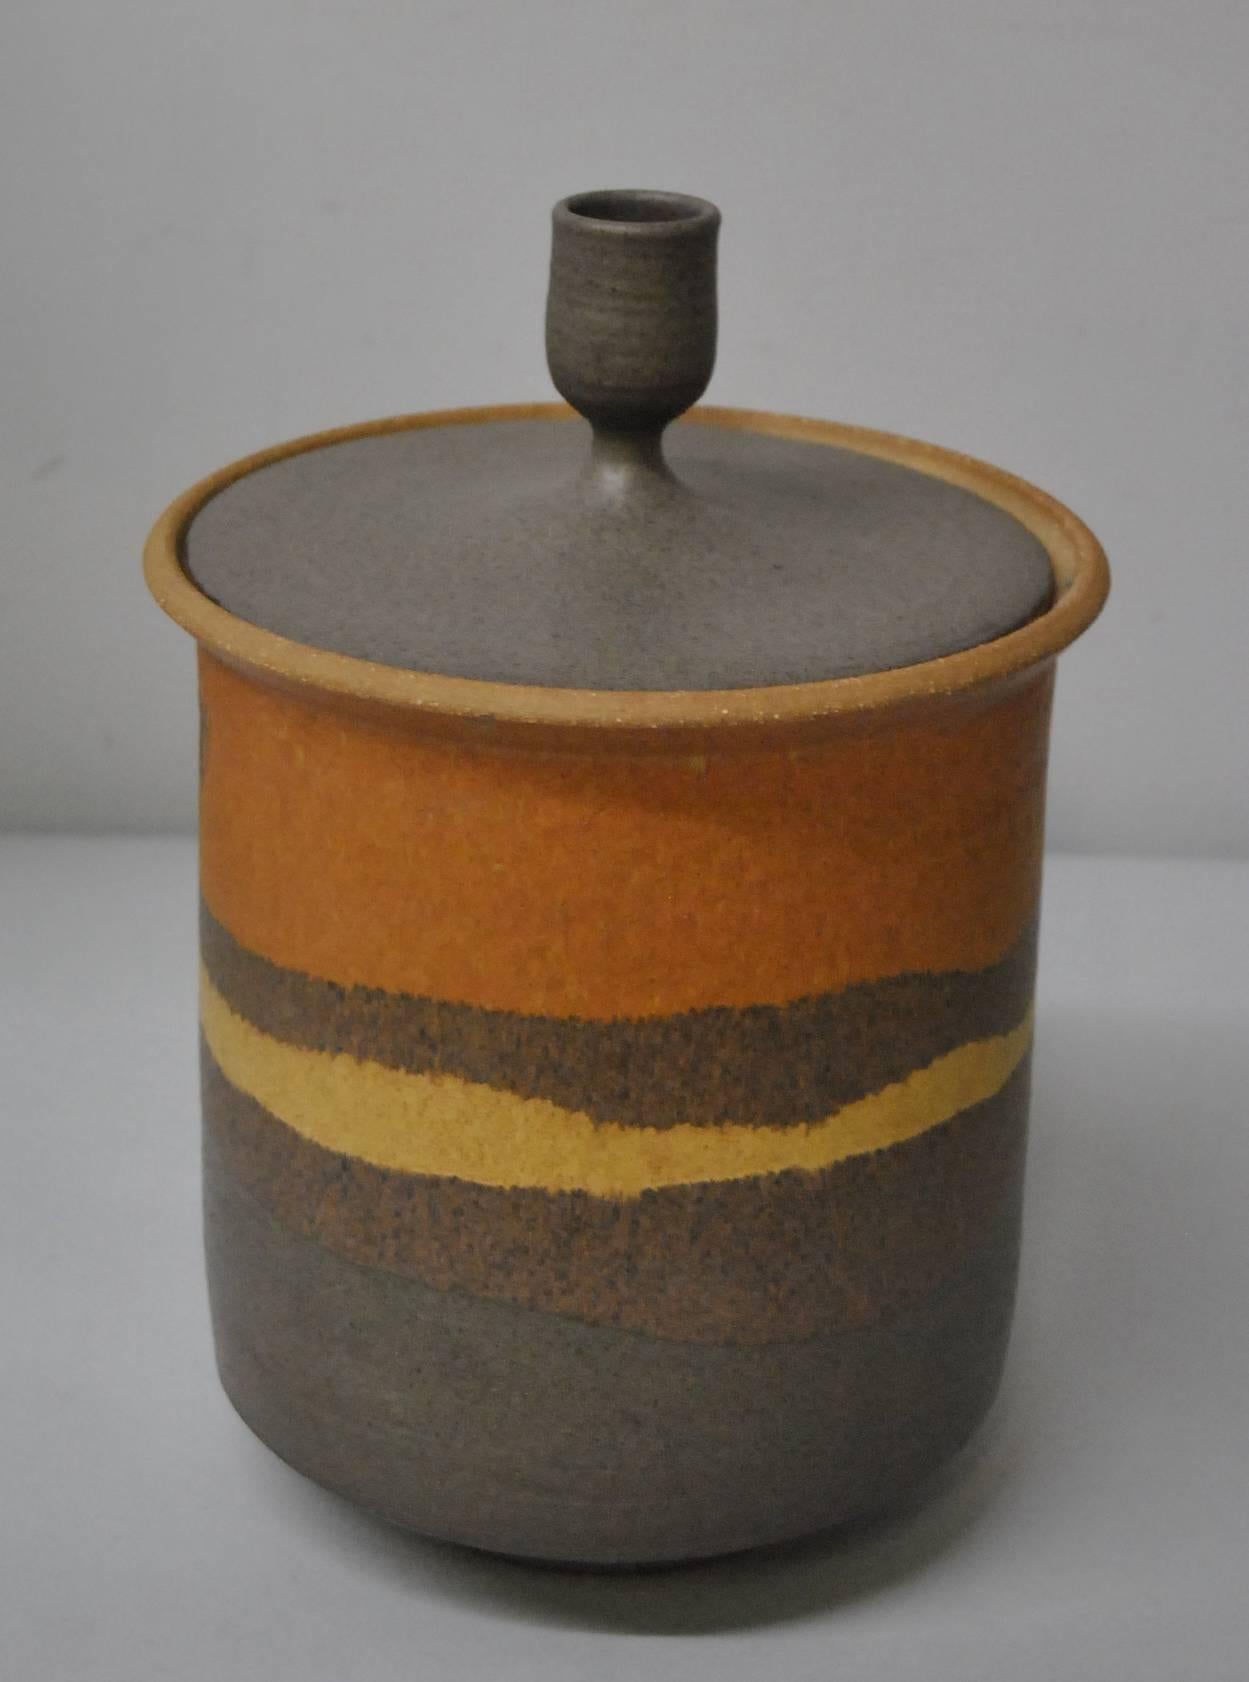 An impressive earthenware vessel with lid by Clydee Burt, 1922-1981.  It features glazed desert shades of gold, terra cotta and browns.  Signed by the artist.  Born in Melrose, OH, Clyde Burt is considered a pioneer is American Art Pottery.  